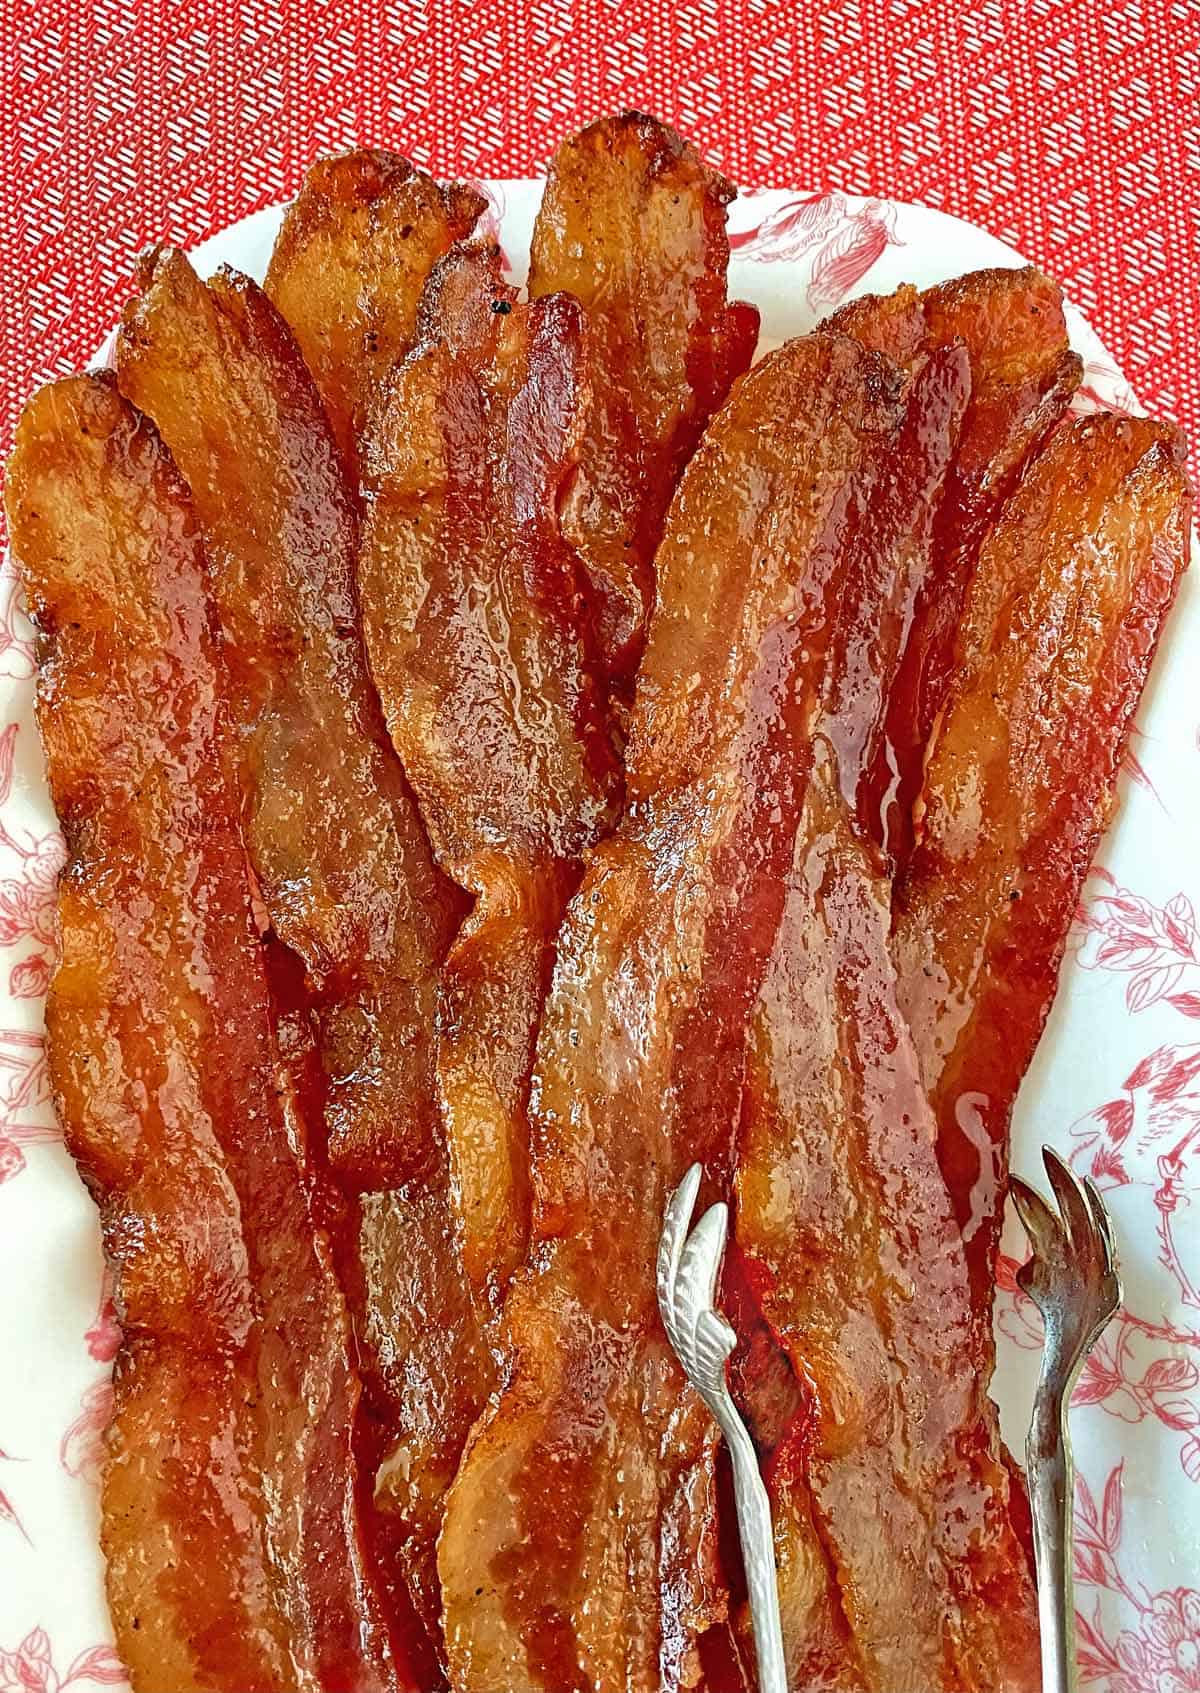 Ten strip of million dollar bacon piled on a pink and white serving dish with silver tongs.